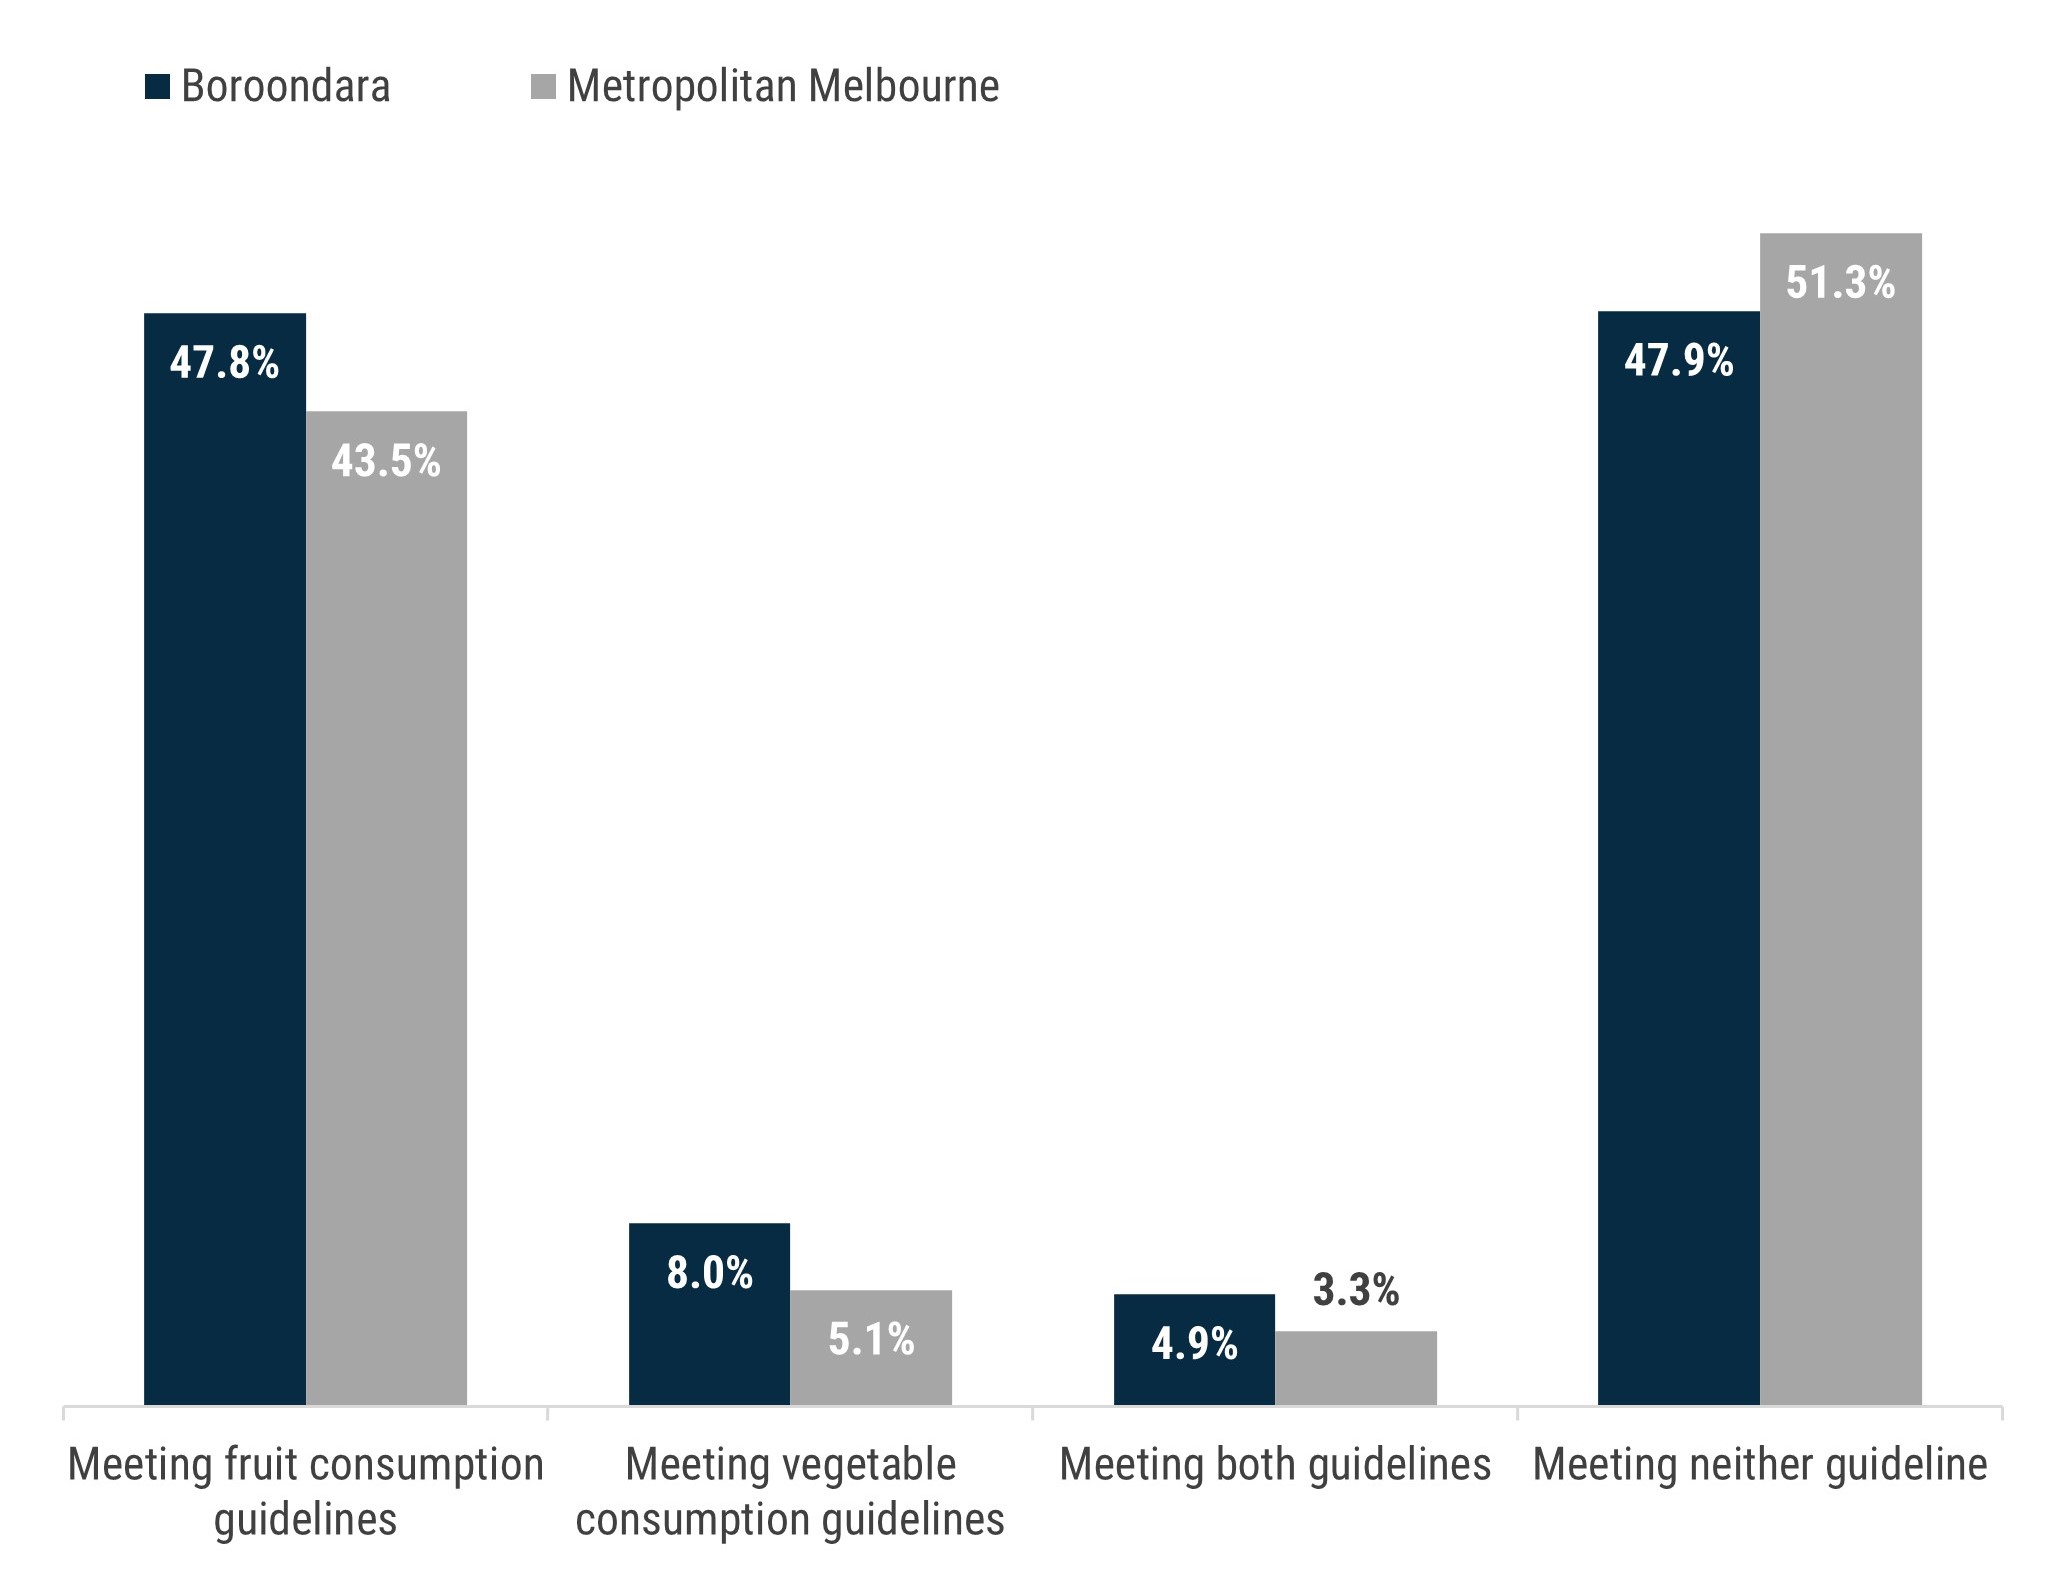 Column chart which shows the proportion of Boroondara and metropolitan Melbourne residents (18+) who met fruit or vegetable consumption guidelines in the 2017 Victorian Population Health Survey. Fruit consumption guidelines were met by 47.8% of Boroondara residents and 43.5% of metro Melbourne residents. Vegetable consumption guidelines were met by 8% of Boroondara and 5.1% of metro Melbourne residents. Both guidelines were met by 4.9% of Boroondara residents and 3.3% of metro Melbourne residents. Neither g